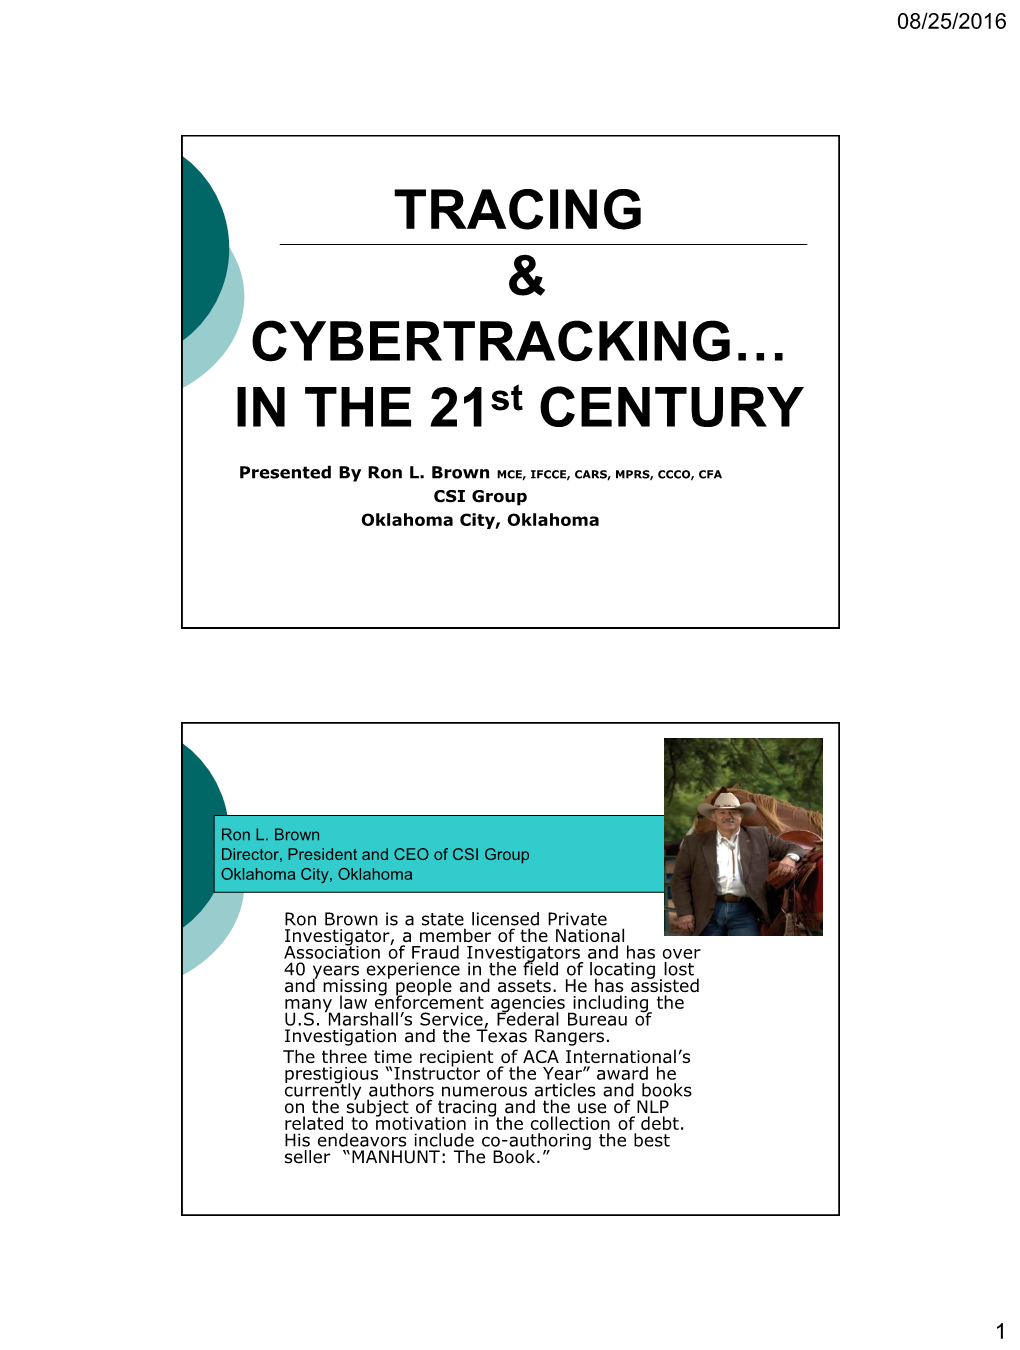 Tracing & Cybertracking…